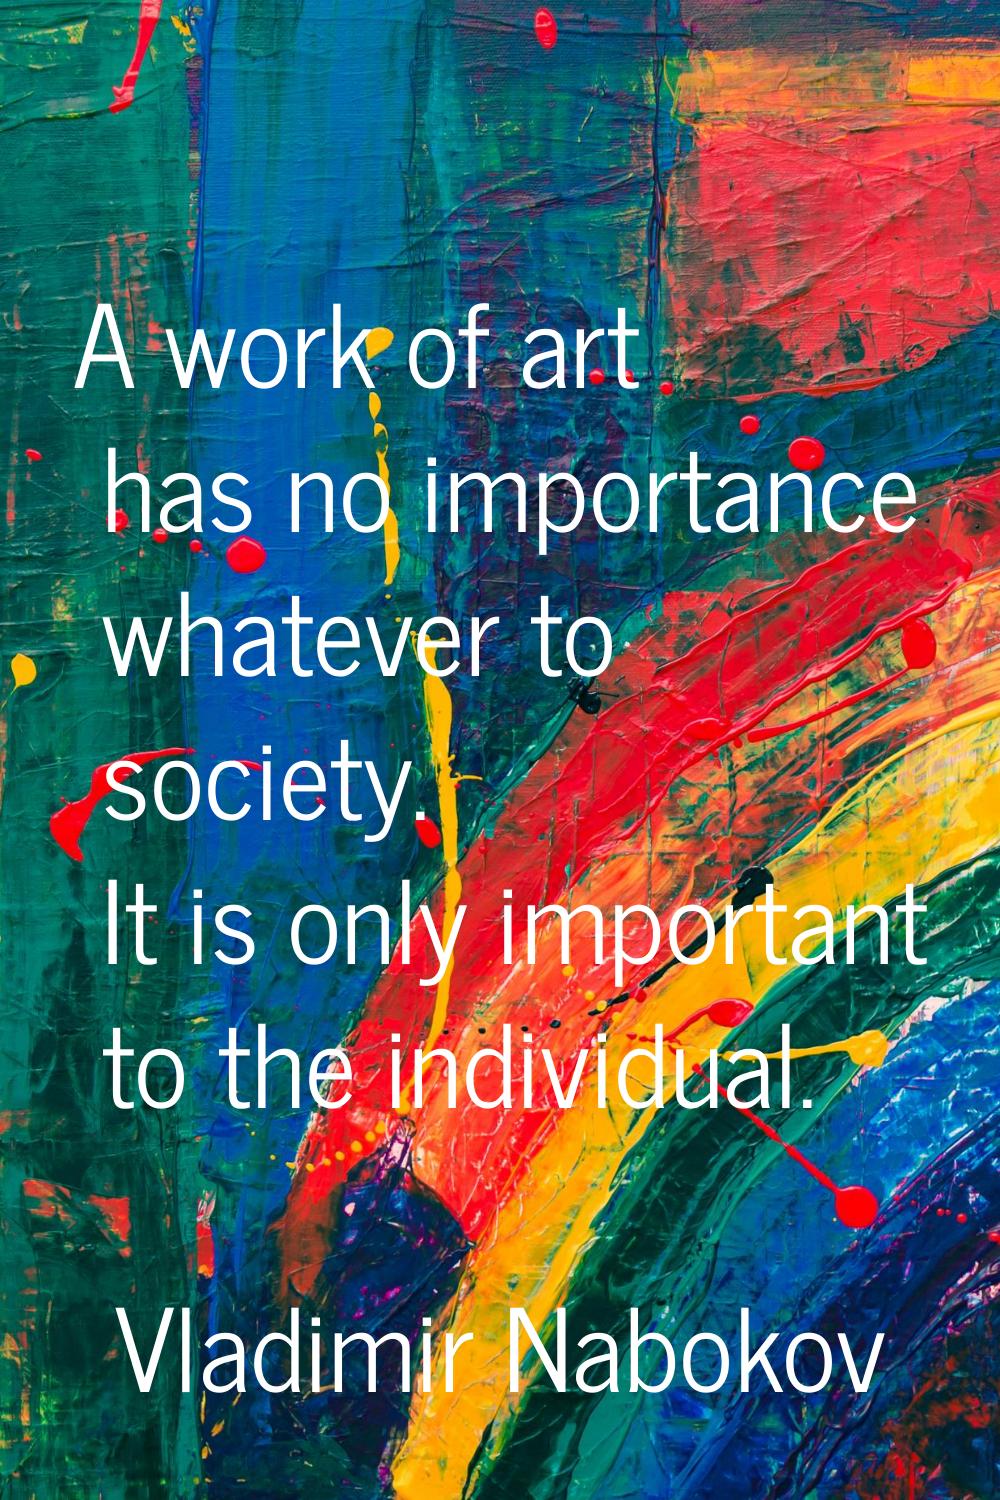 A work of art has no importance whatever to society. It is only important to the individual.